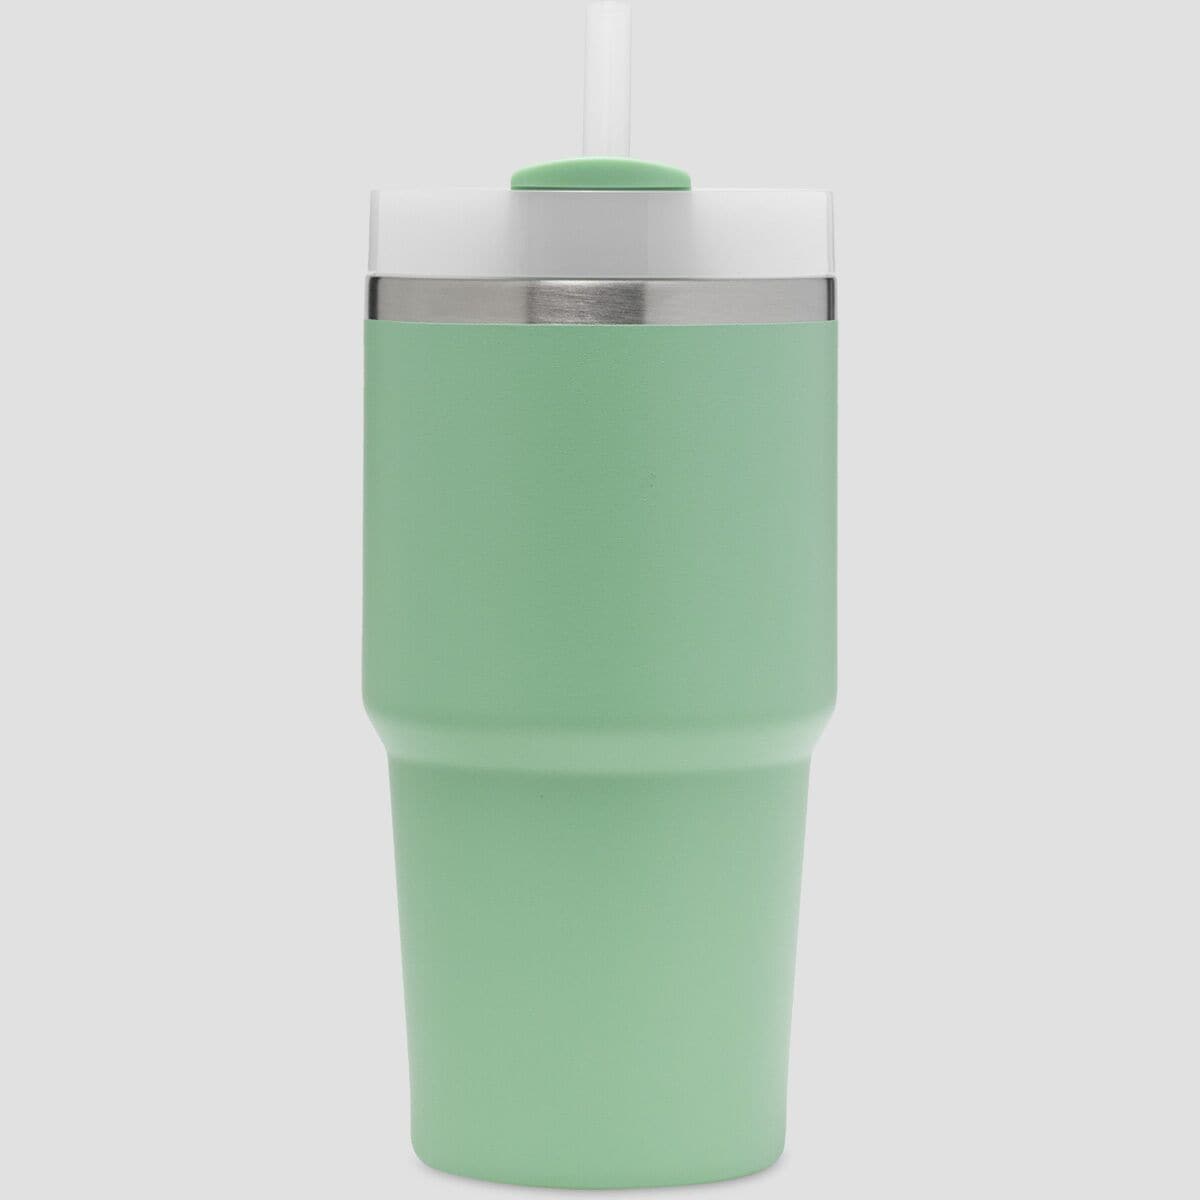 Outlet ❤️ Stanley The Quencher H2.0 FlowState™ Tumbler, 14 OZ ✨